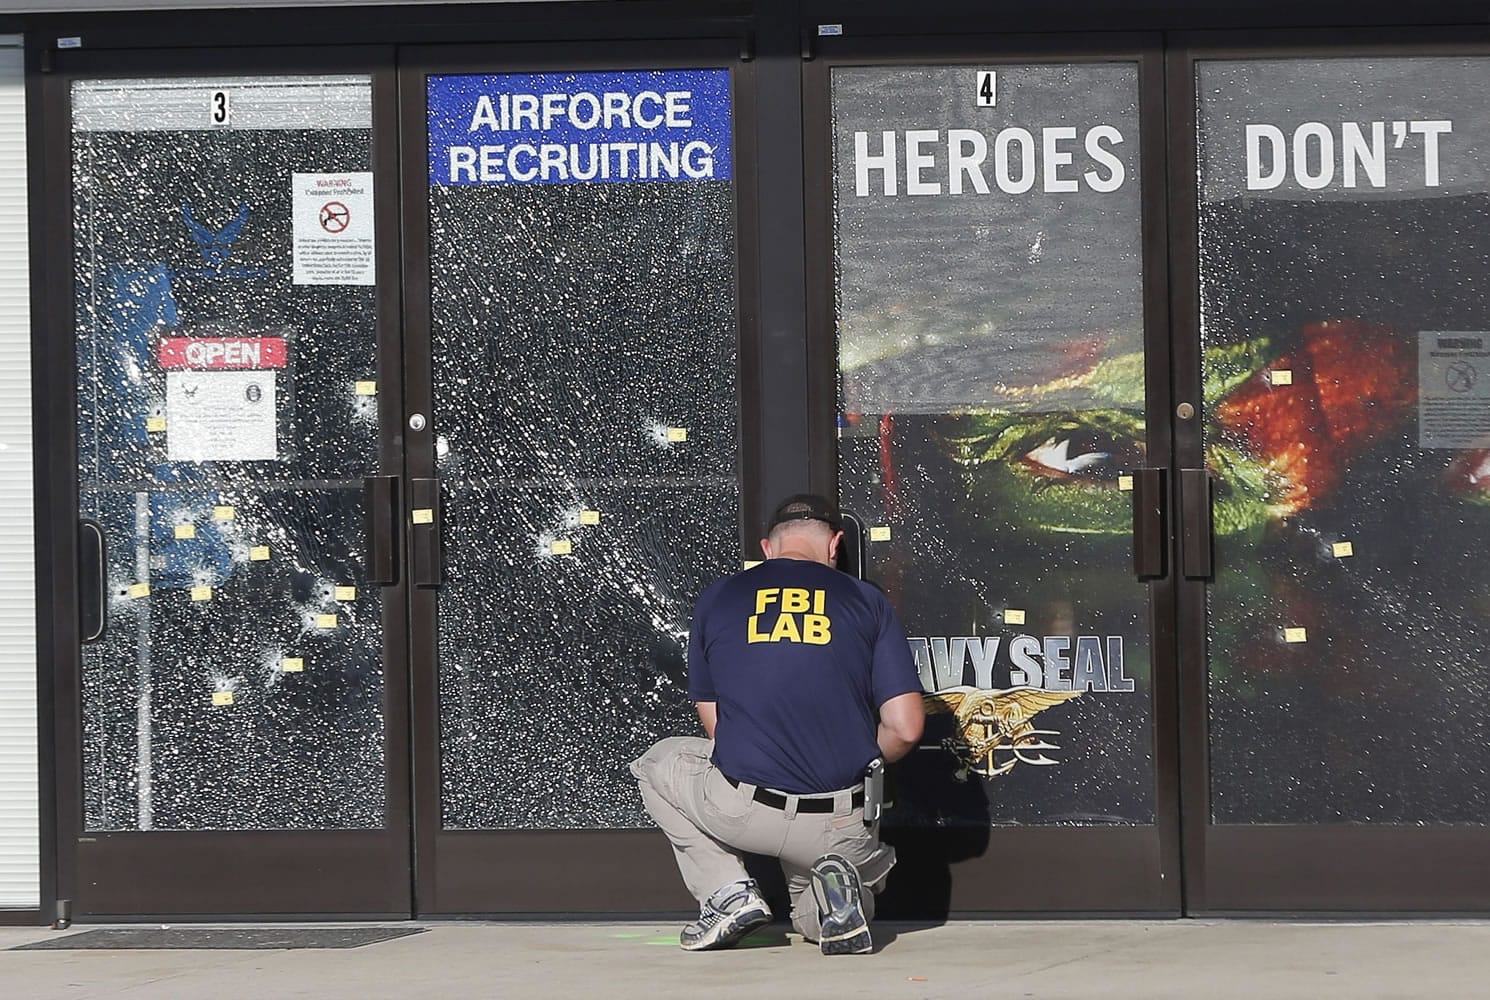 FILE - In this July 17, 2015, file photo, an FBI investigator investigates the scene of a shooting outside a military recruiting center in Chattanooga, Tenn. Violent crime rose across in the country in the first six months of 2015 compared to the same period the year before, according to preliminary data released Tuesday,Jan. 19, 2016, by the FBI.